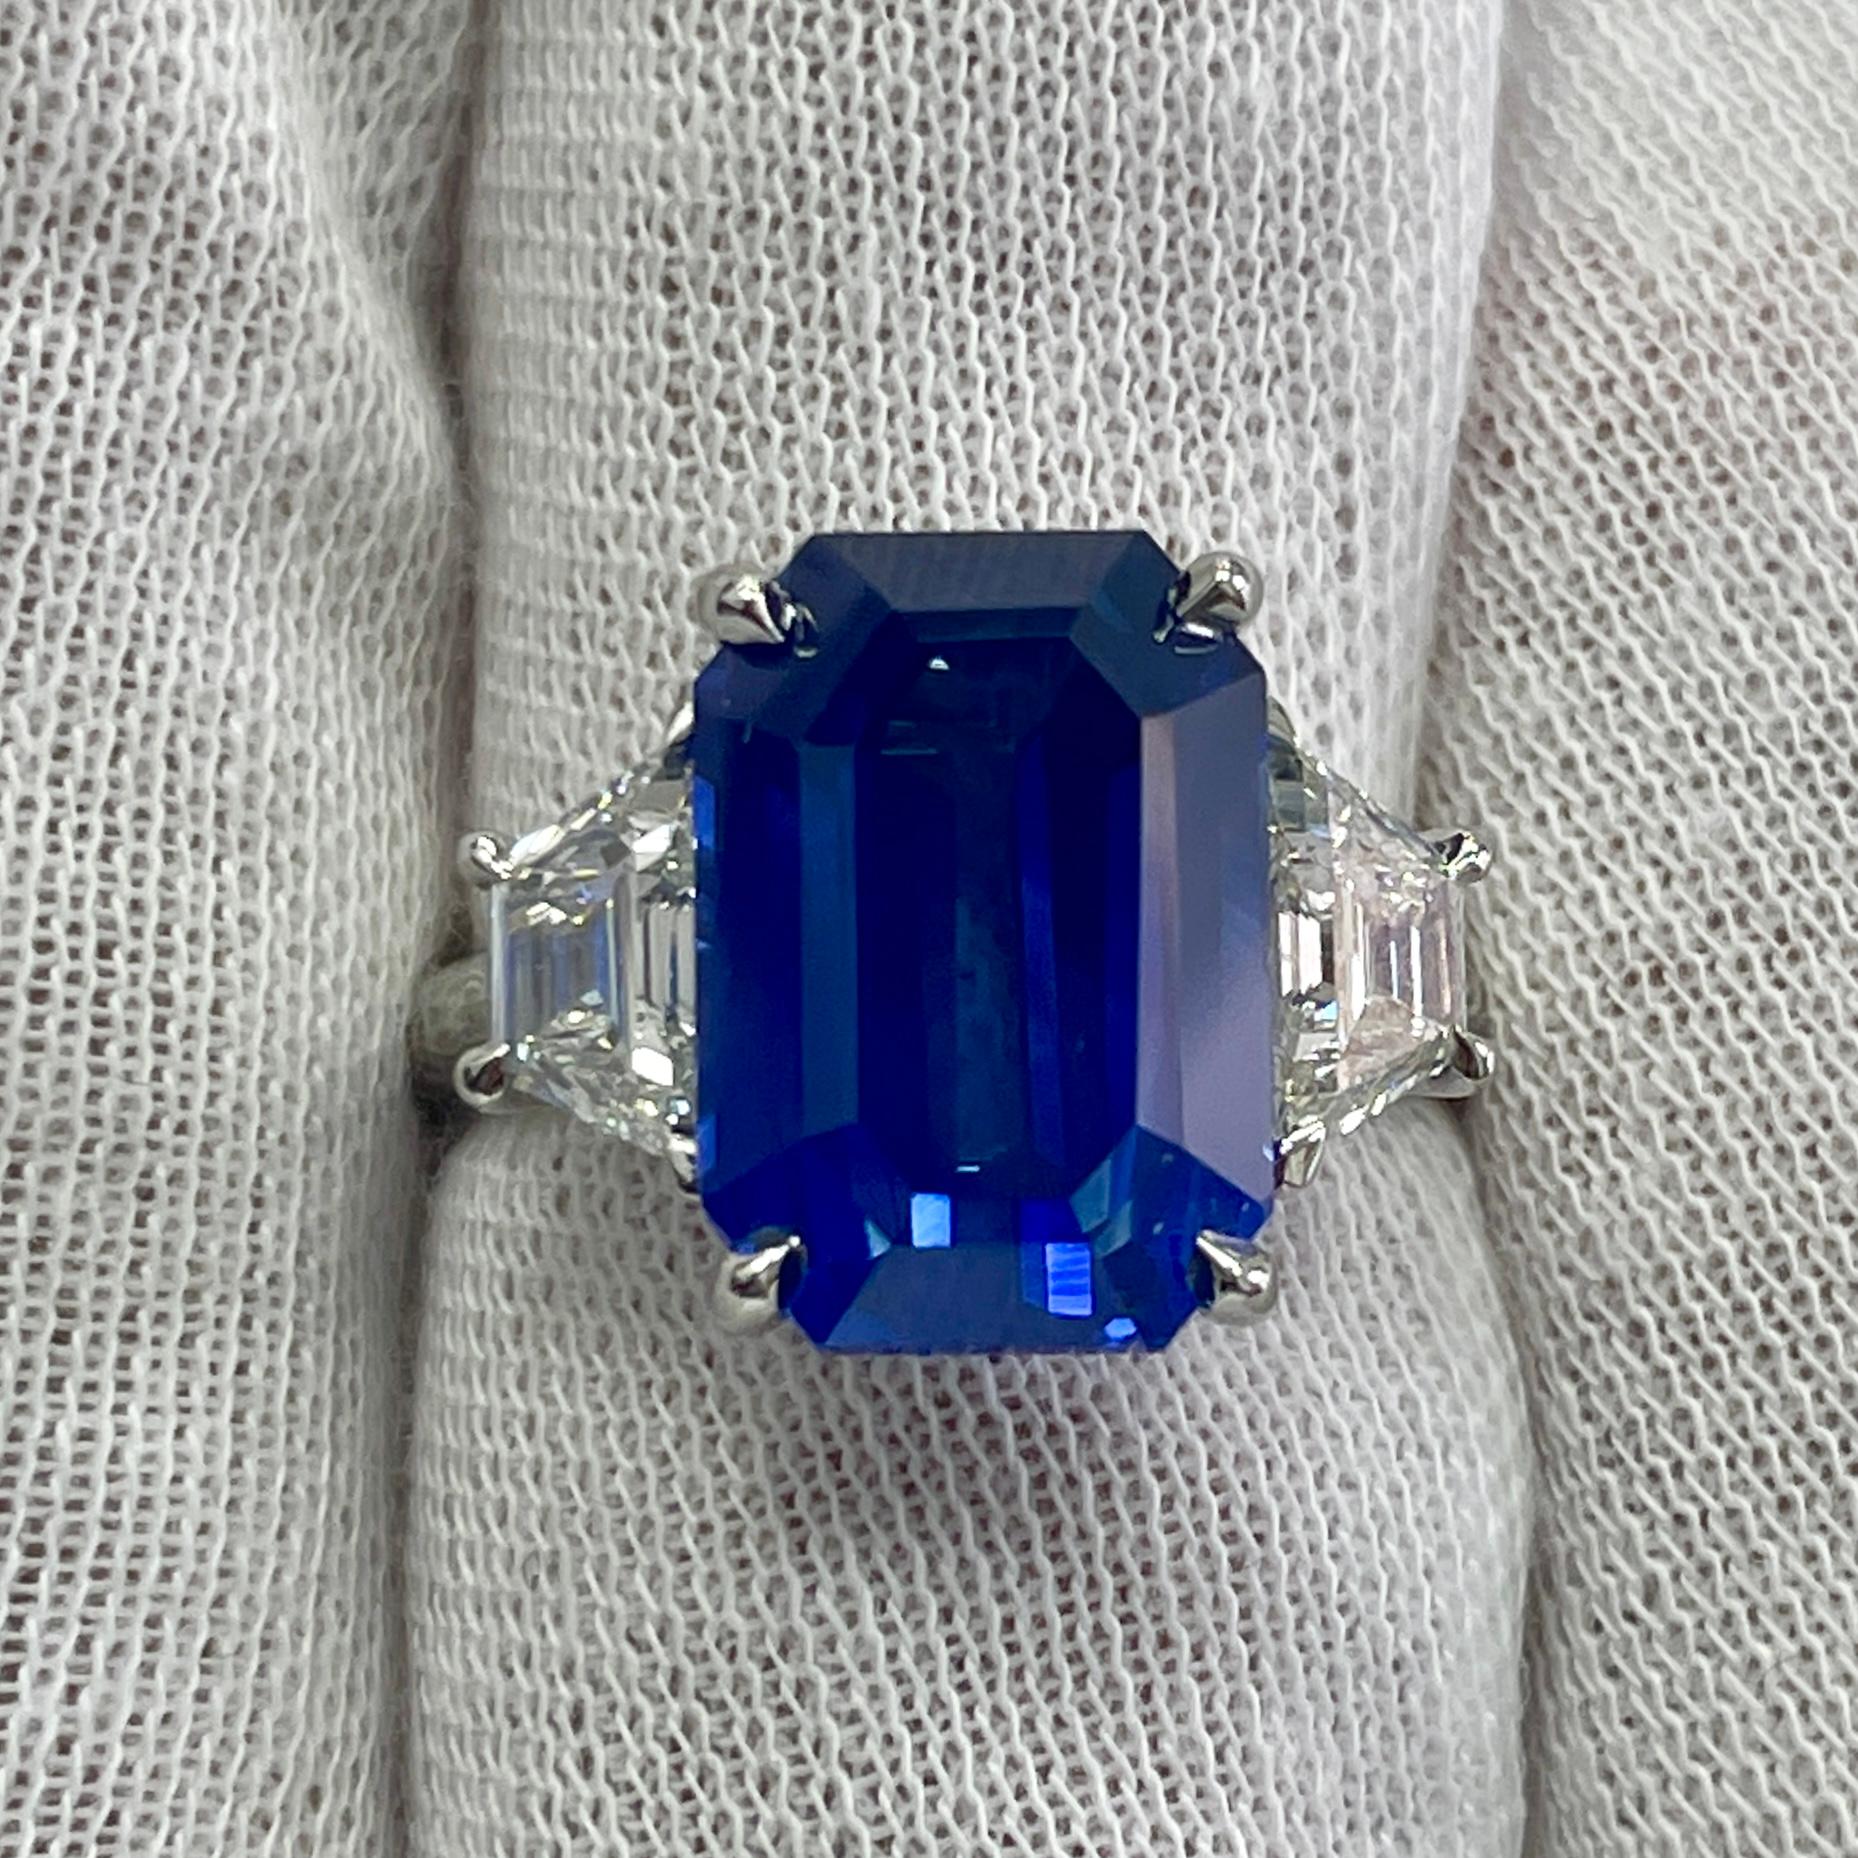 This is a cornflower blue emerald cut sapphire mounted in an elegant platinum ring with 1.04Ct of brilliant white diamonds. Suitable for any occasion!